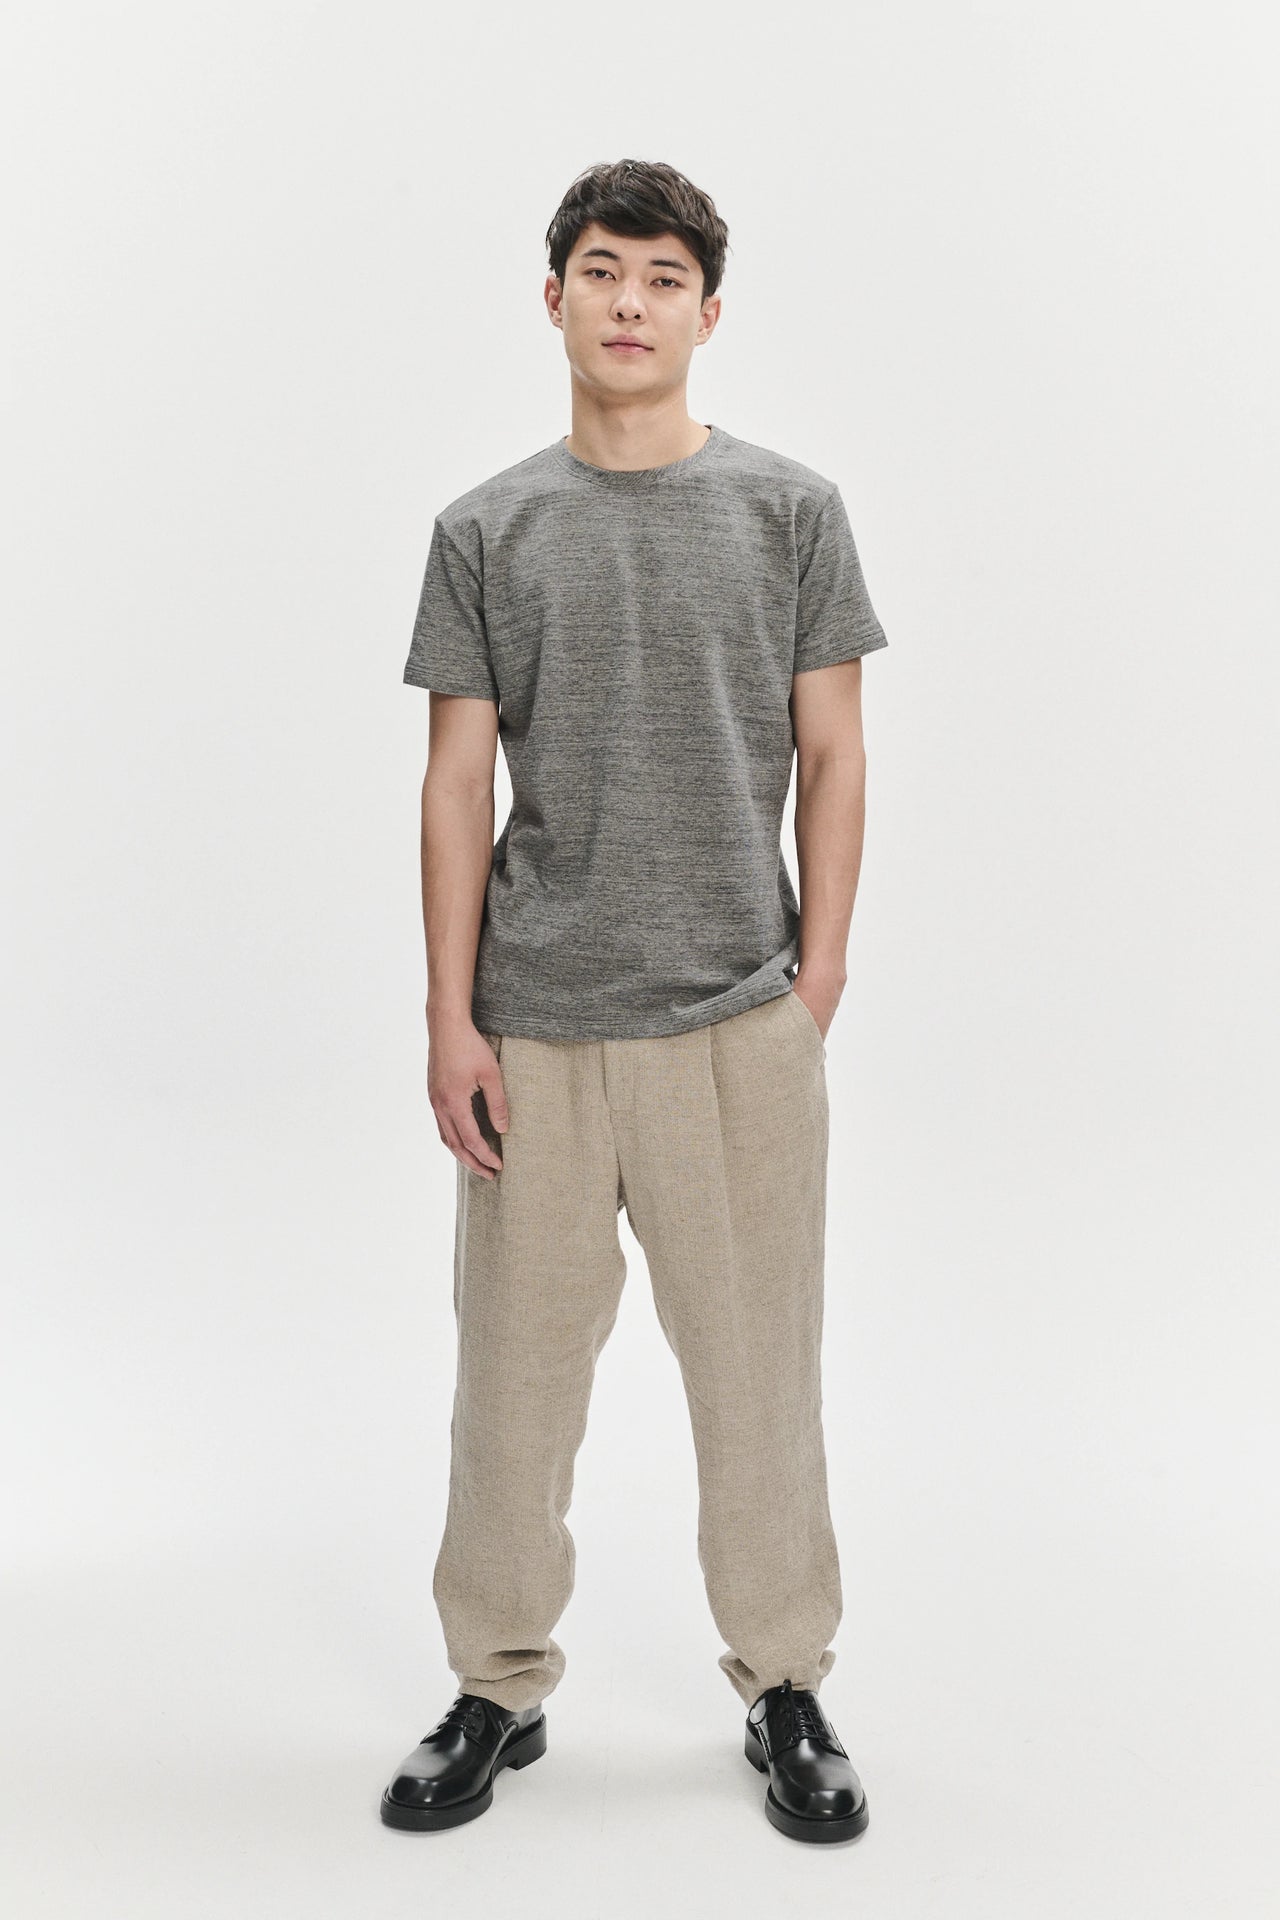 Short Sleeve T-shirt in a Grey Fine Japanese Cotton Jersey